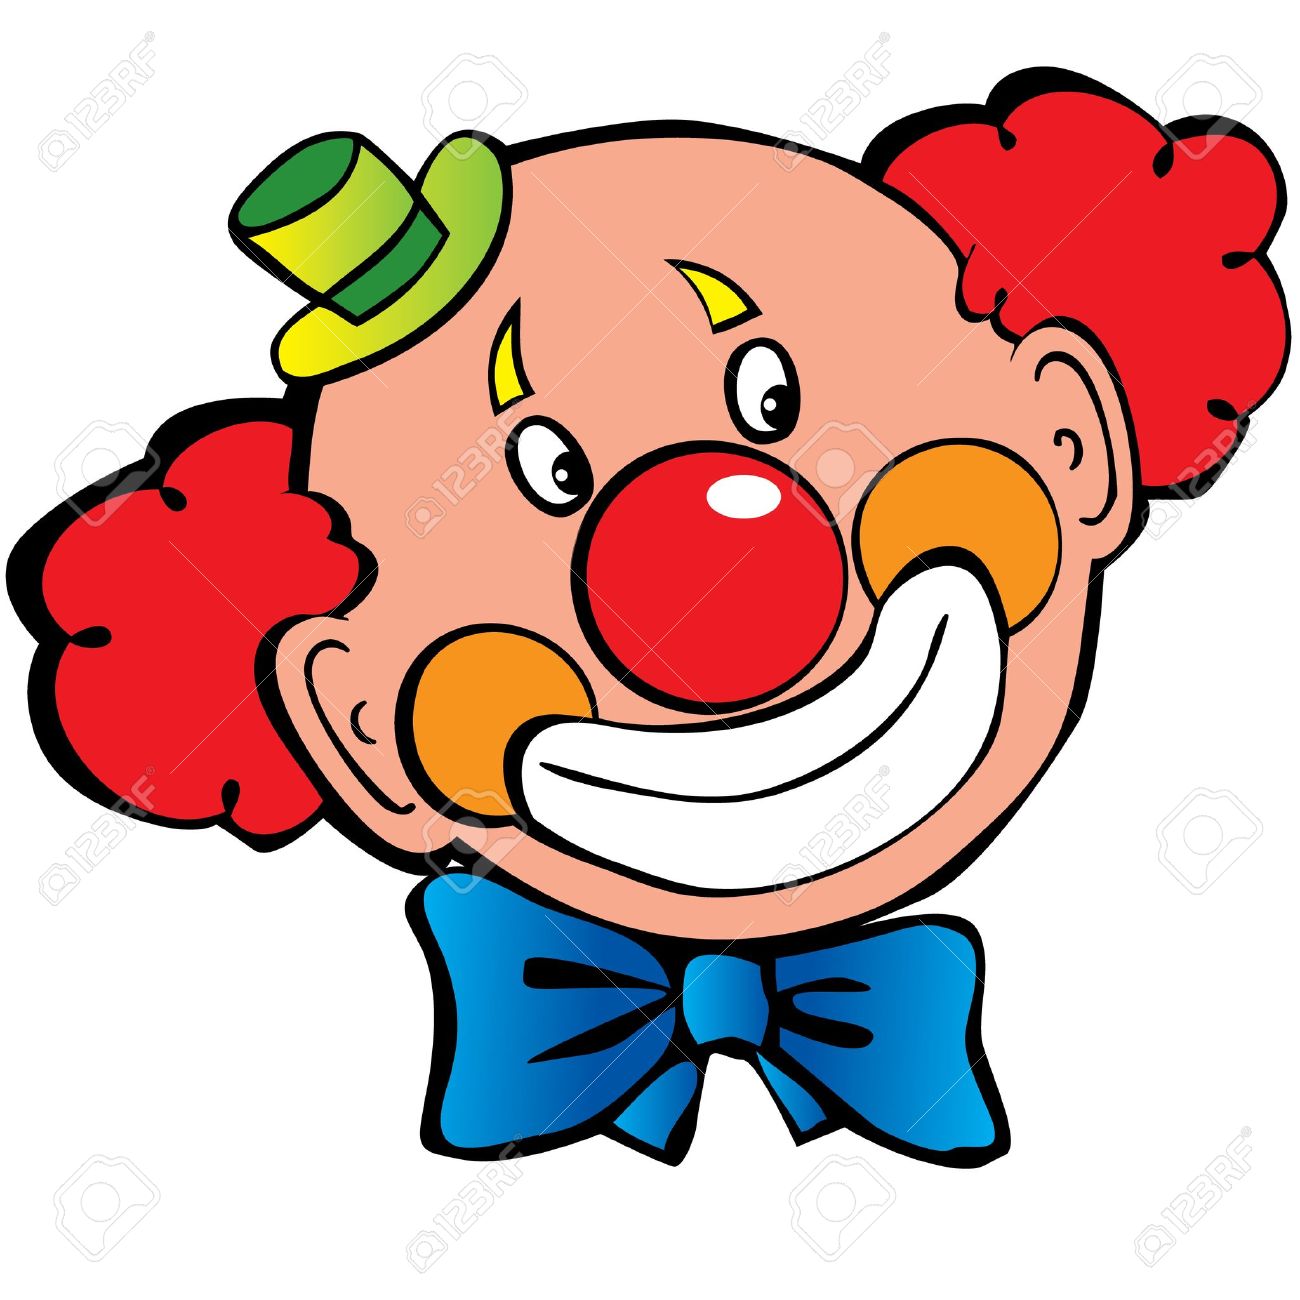 clowns: Happy clown art-illustration on a white background